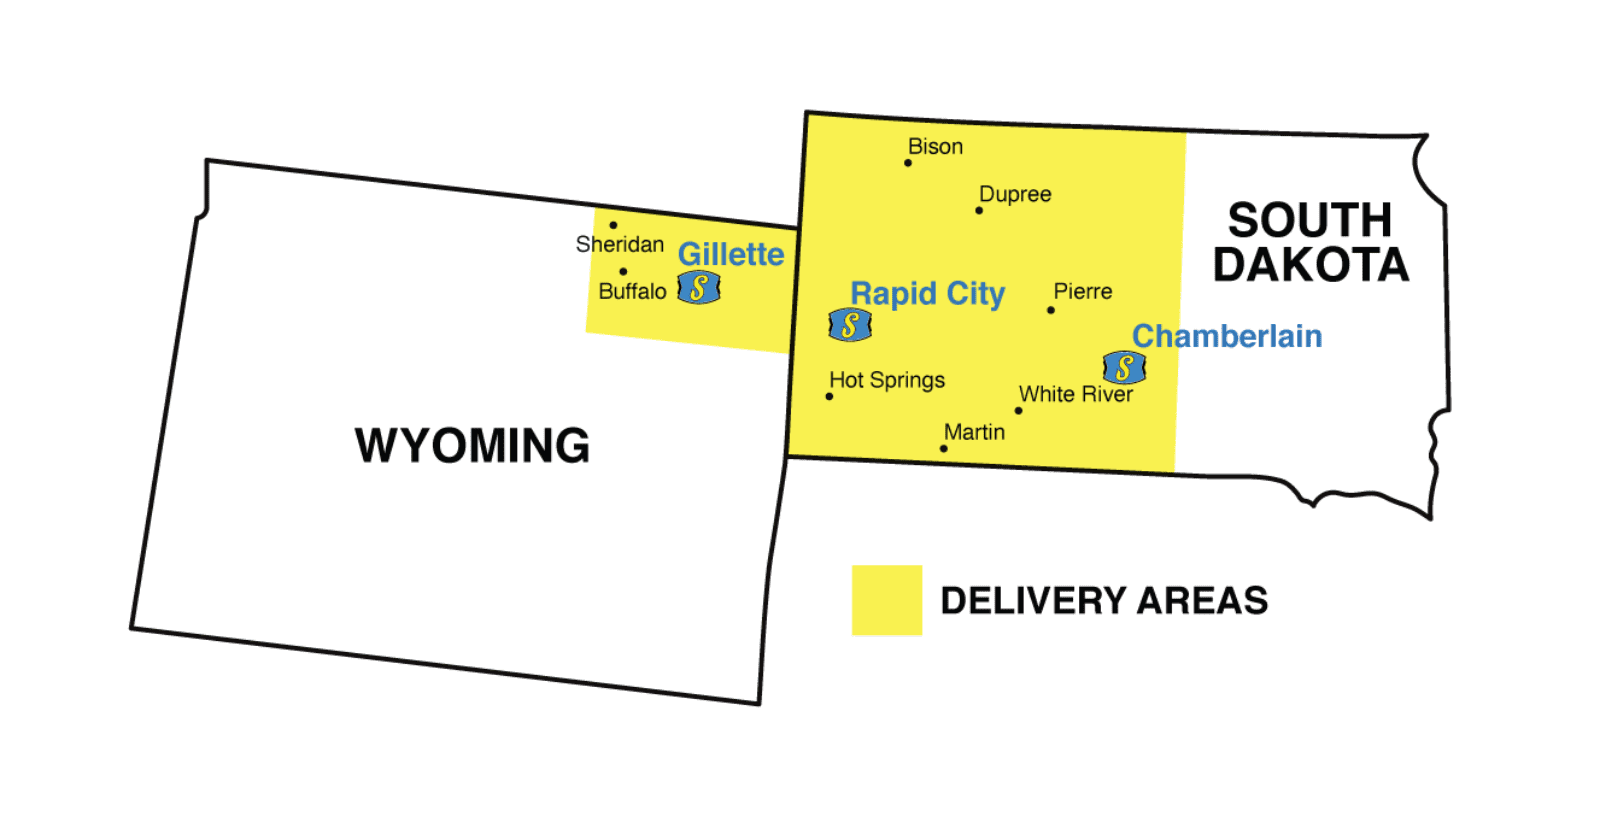 Servall Delivery Areas for Wyoming and South Dakota